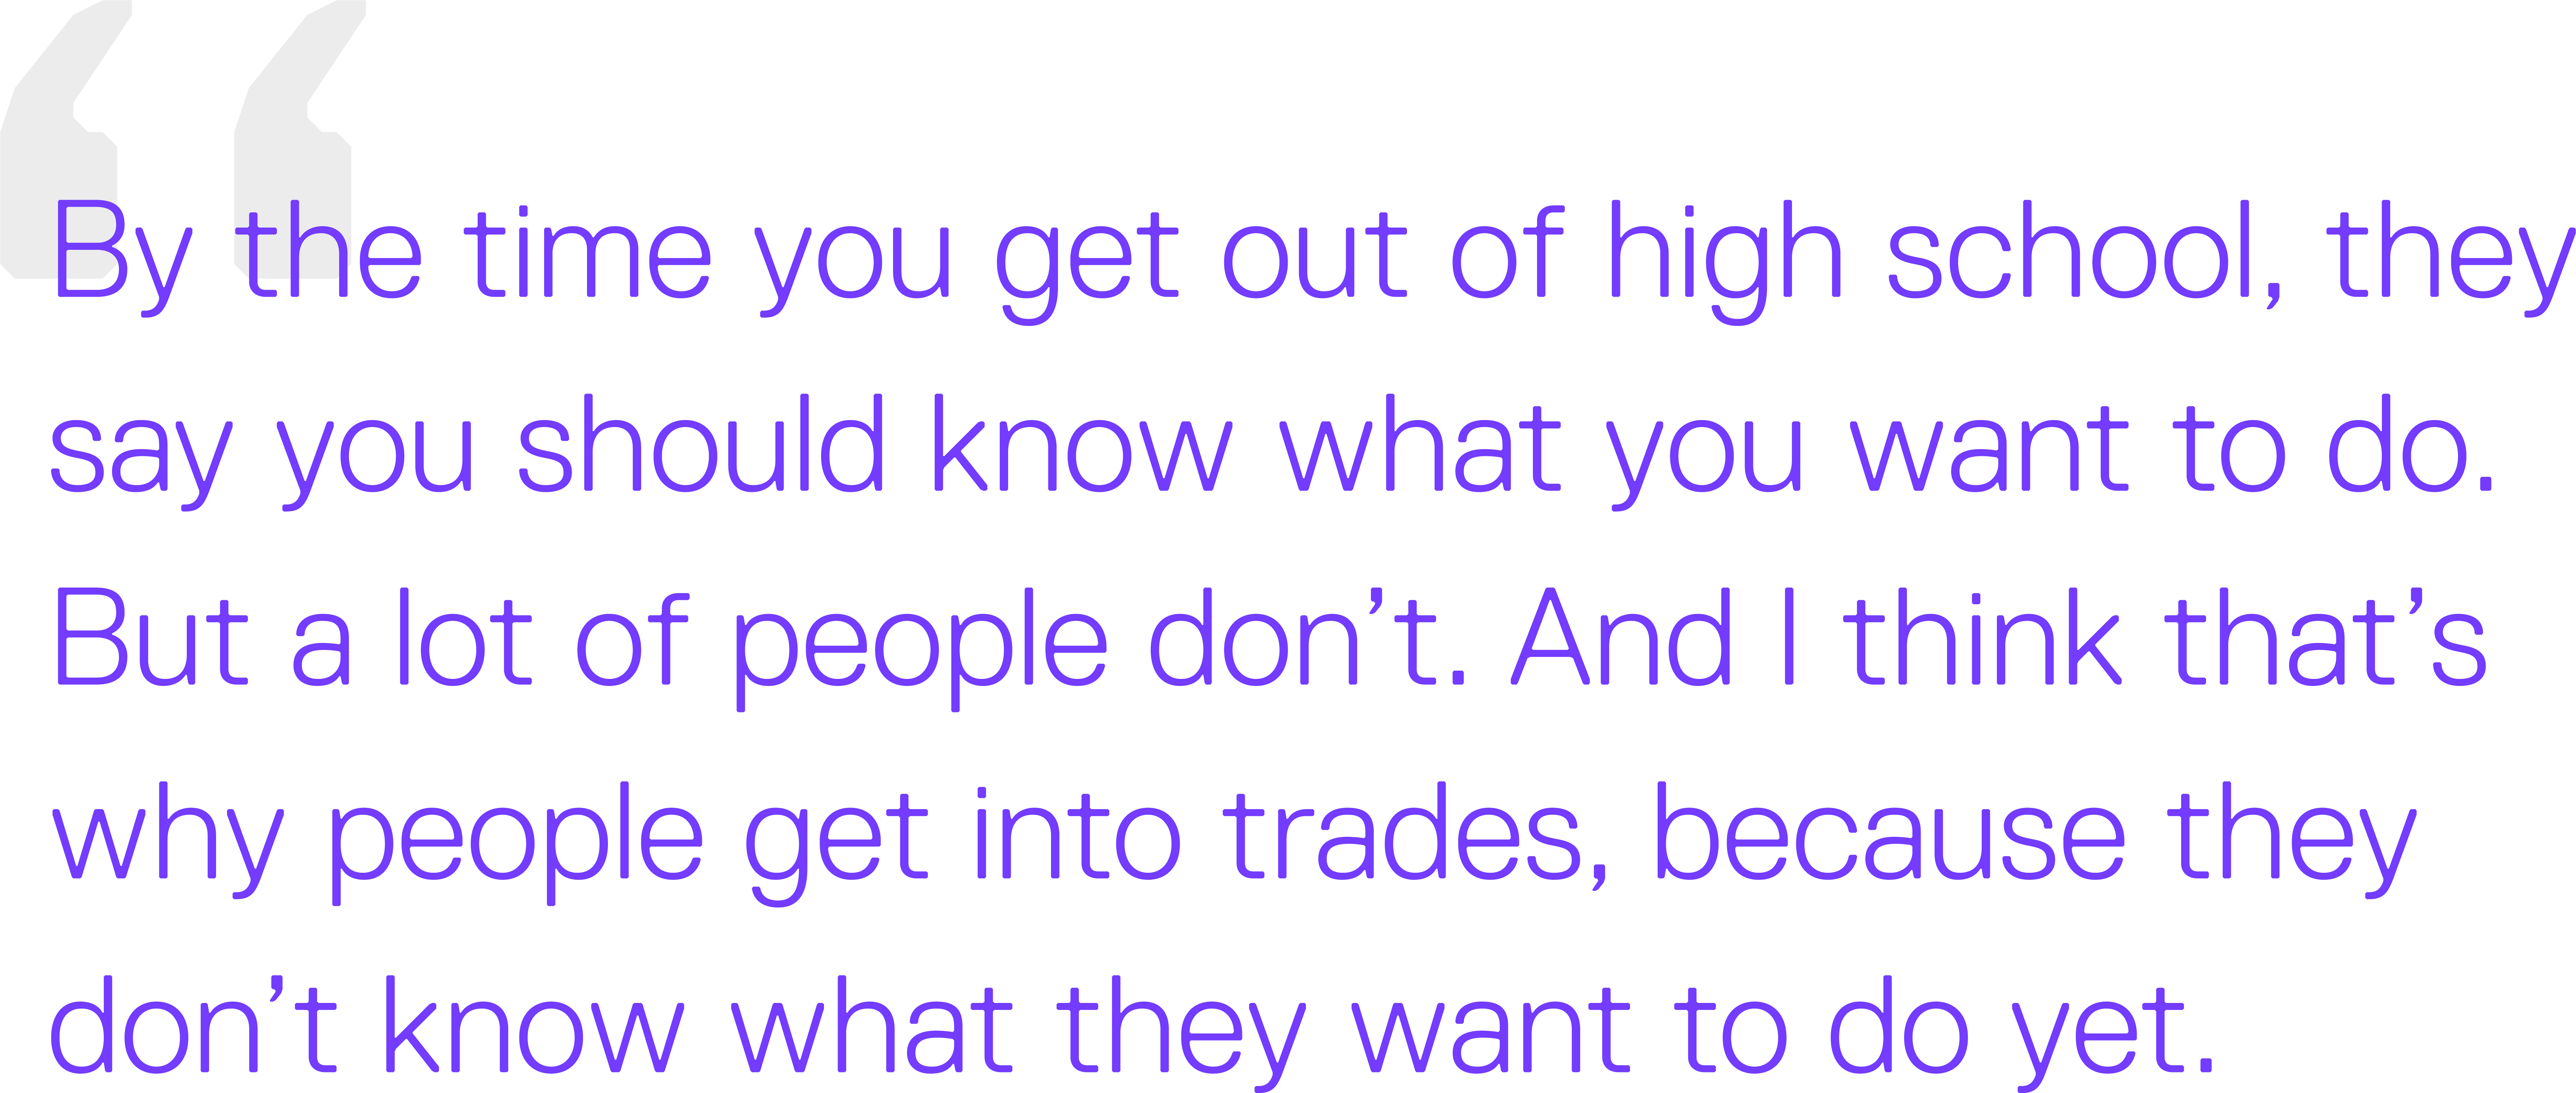 There needs to be more room for practical knowledge. You learn about what you care about growing up. By the time you get out of high school, they say you should know what you want to do. But a lot of people don’t. And I think that’s why people get into trades, because they don’t know what they want to do yet. 